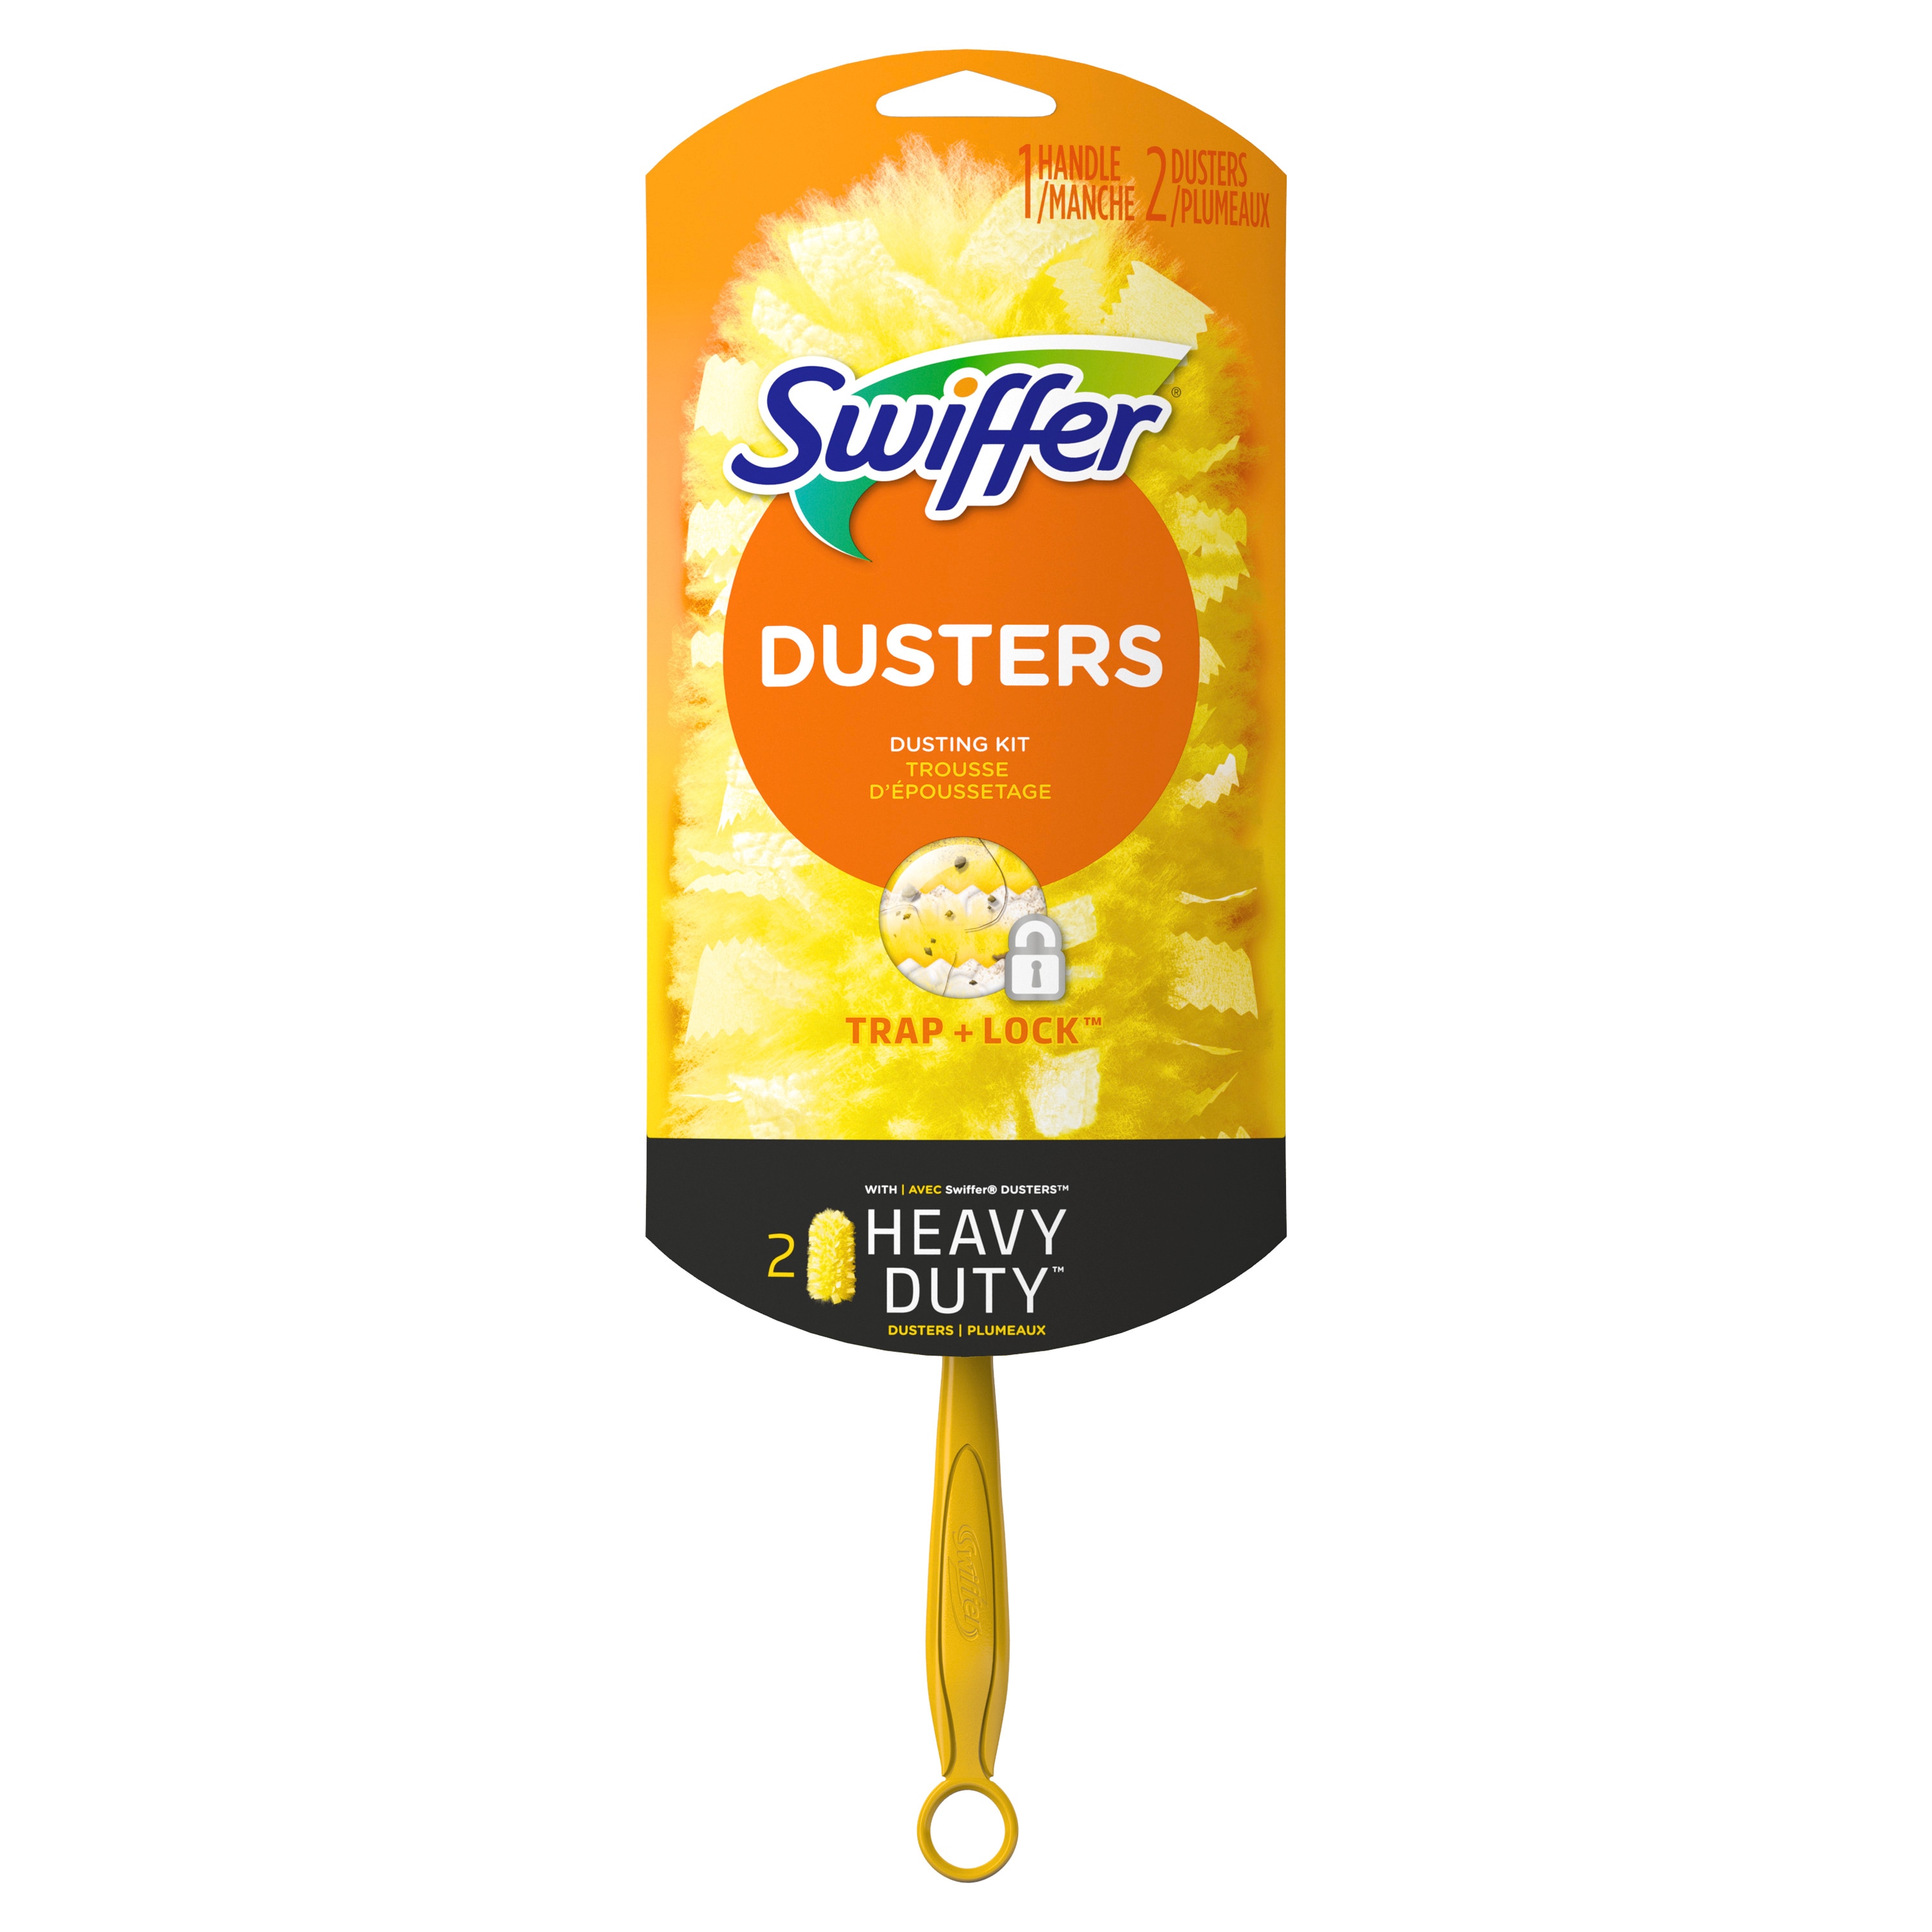 Microfiber Duster Cleaning Brush Dust Cleaner Bendable Handle Soft Ceiling  Fan - Redstag Supplies